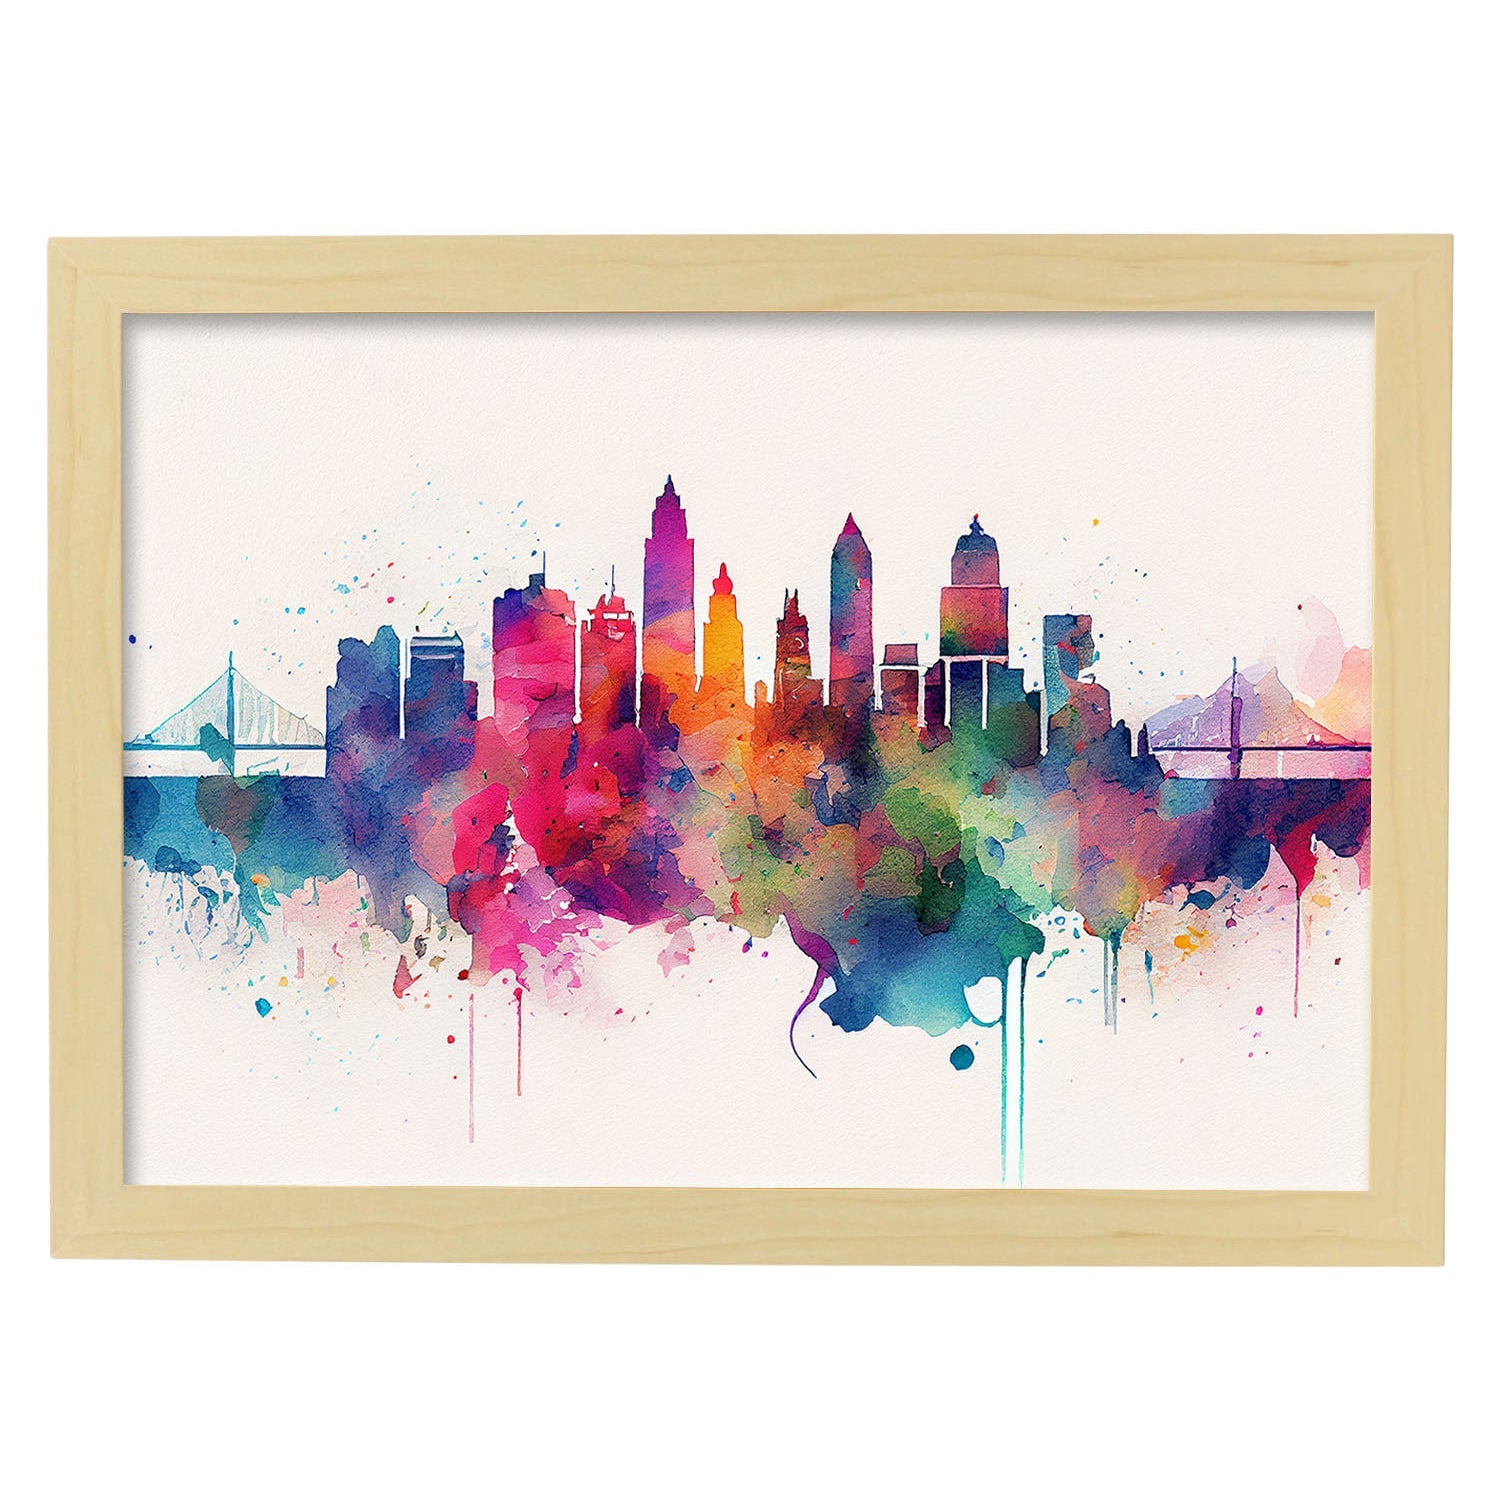 Nacnic watercolor of a skyline of the city of St. Aesthetic Wall Art Prints for Bedroom or Living Room Design.-Artwork-Nacnic-A4-Marco Madera Clara-Nacnic Estudio SL